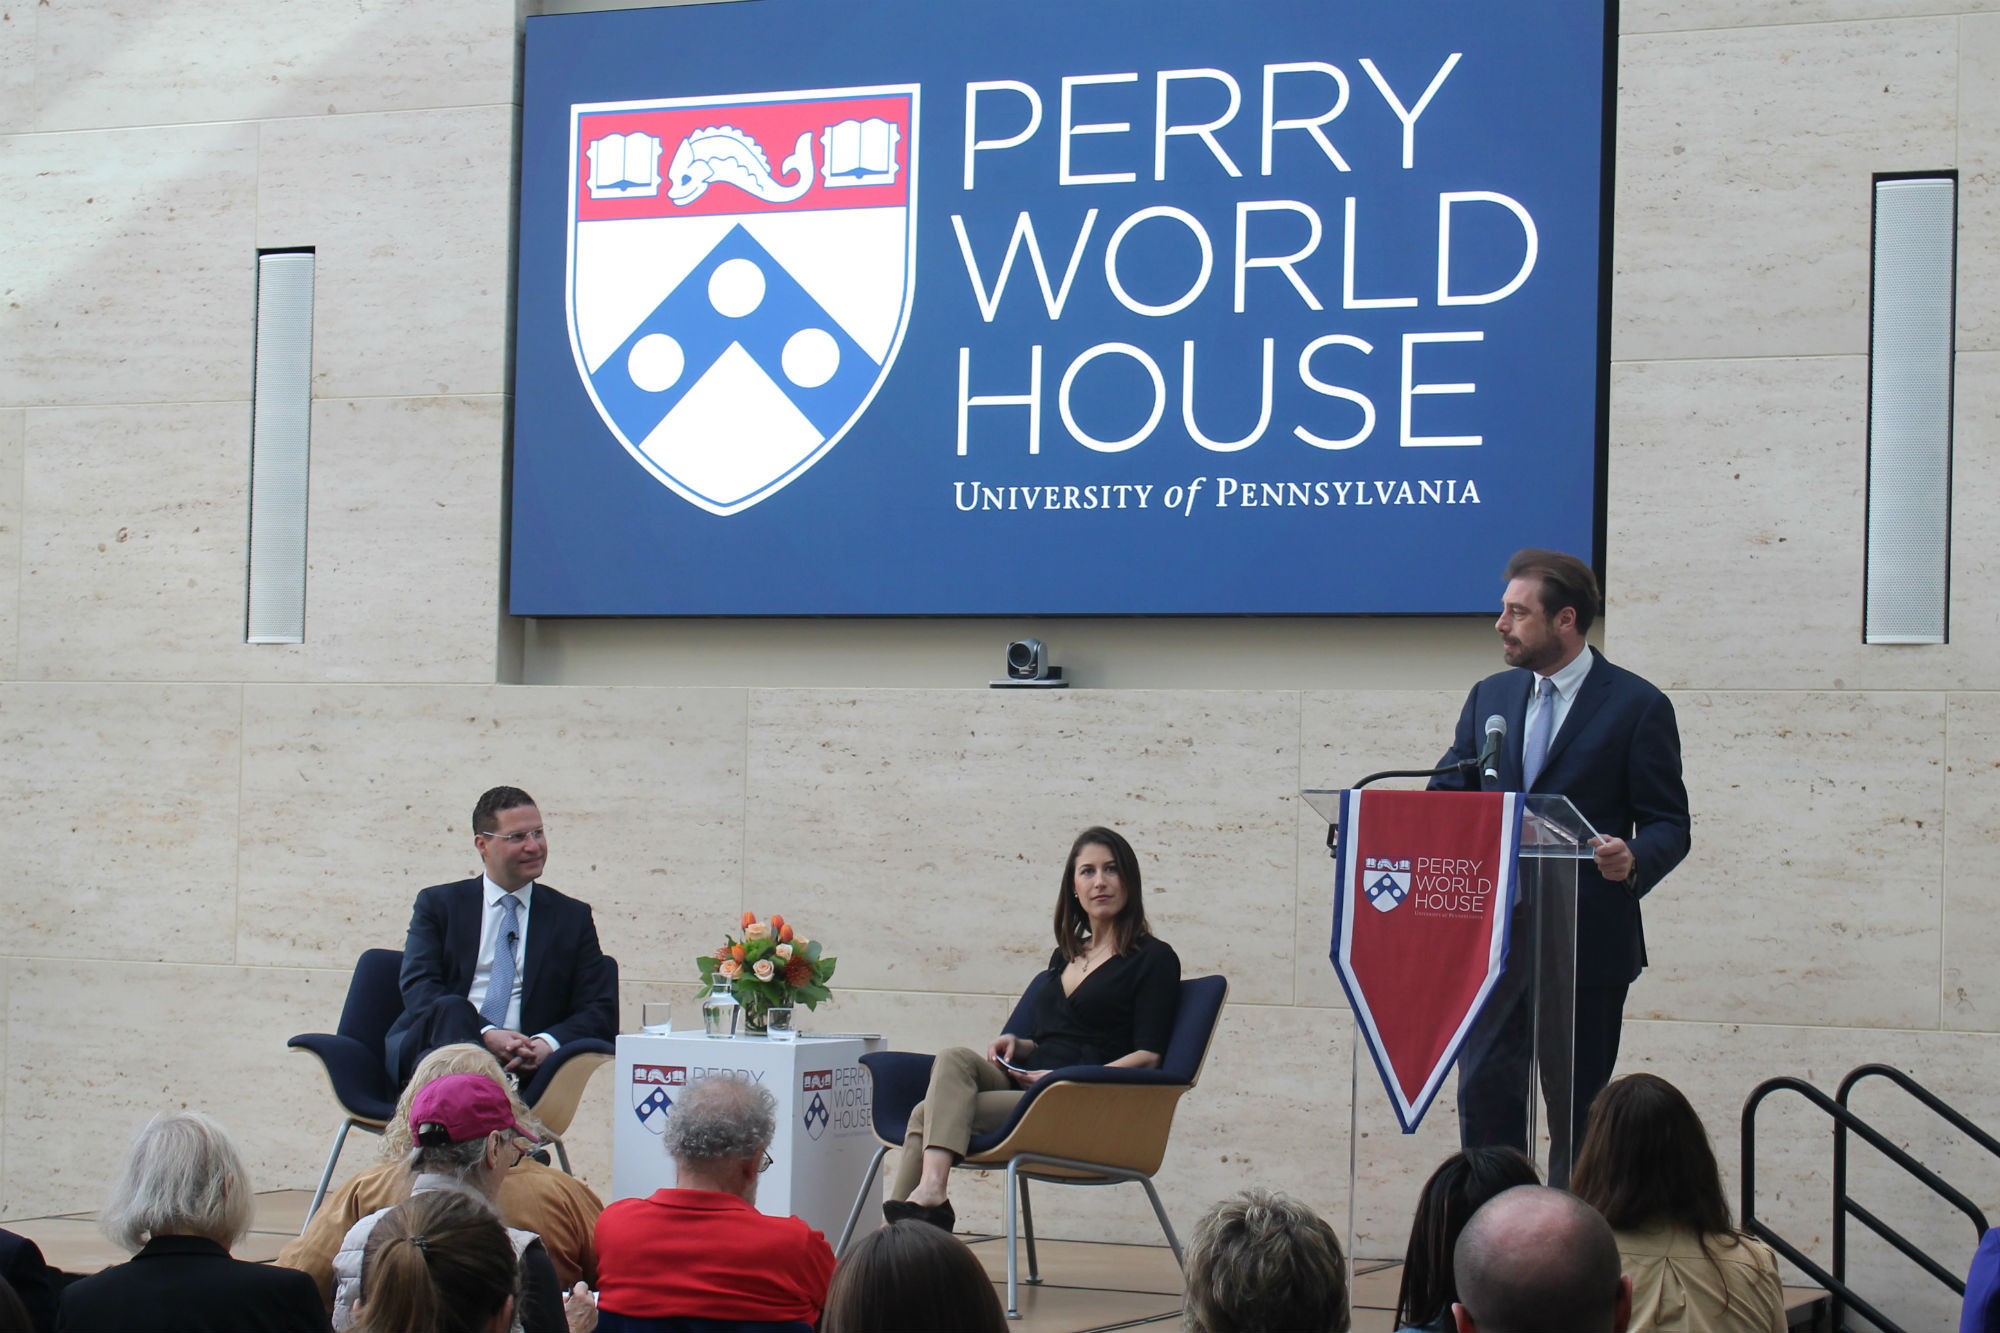 Speakers on stage at Perry World House